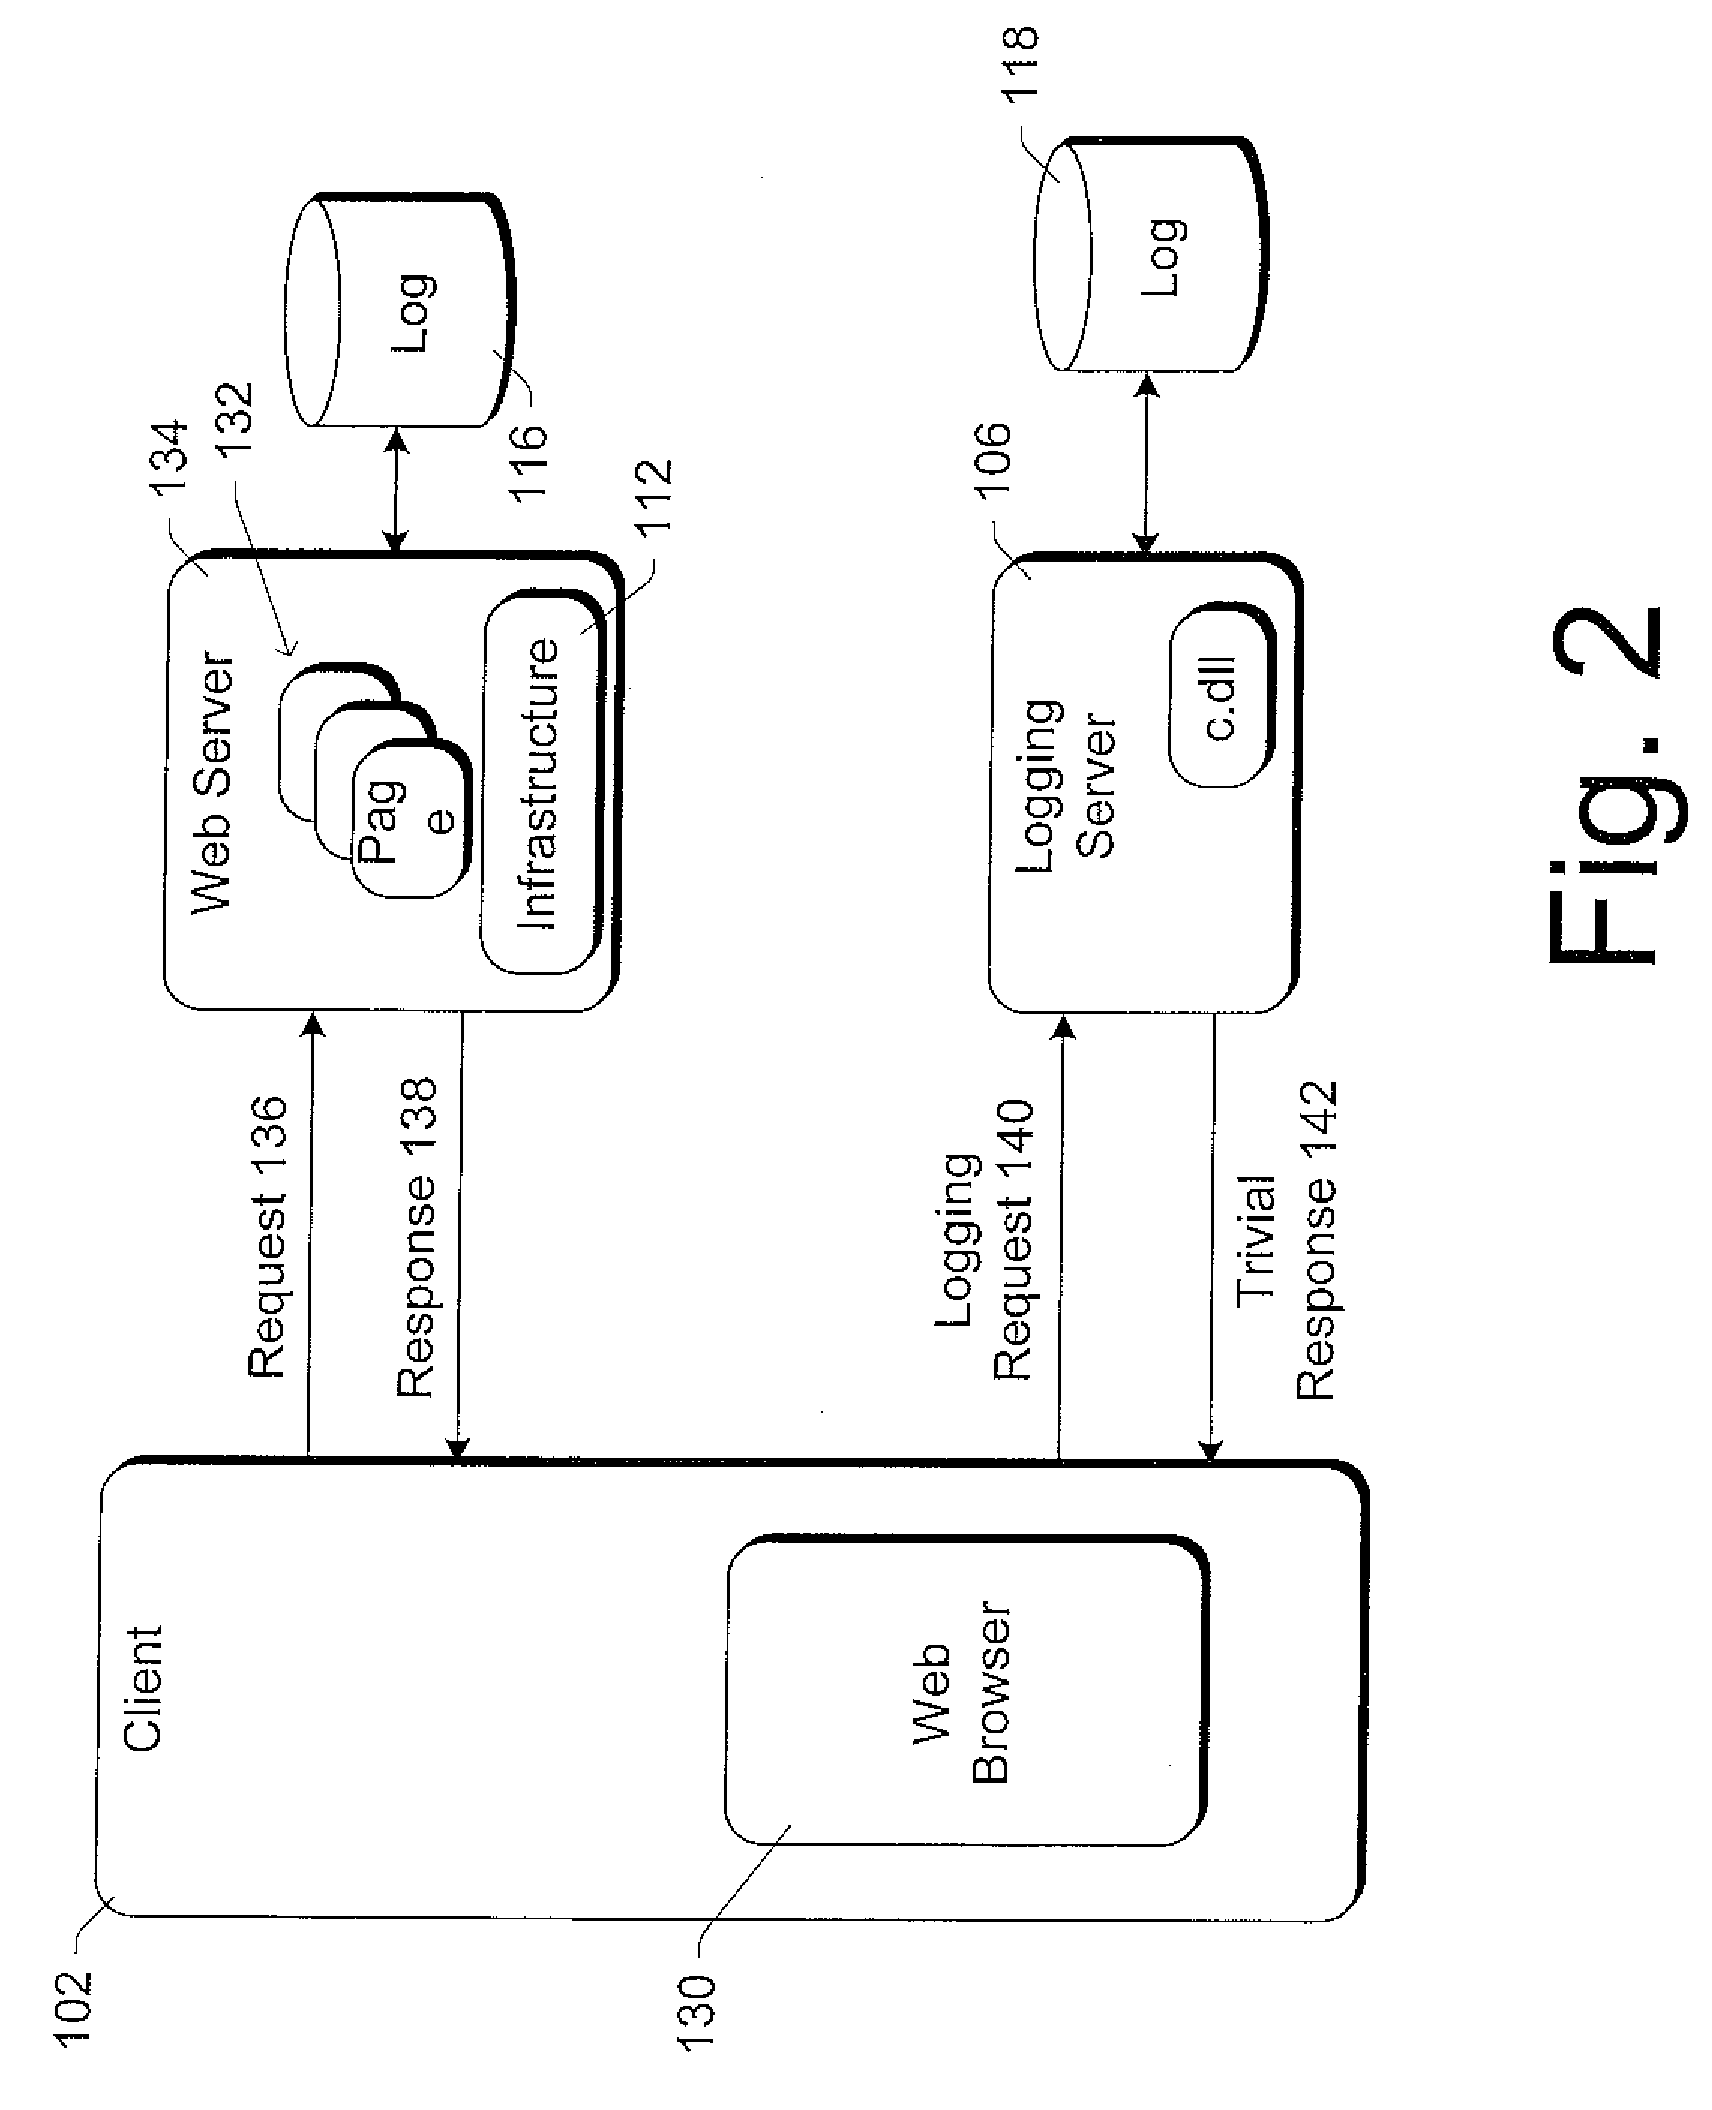 Method and system for providing centralized web usage tracking